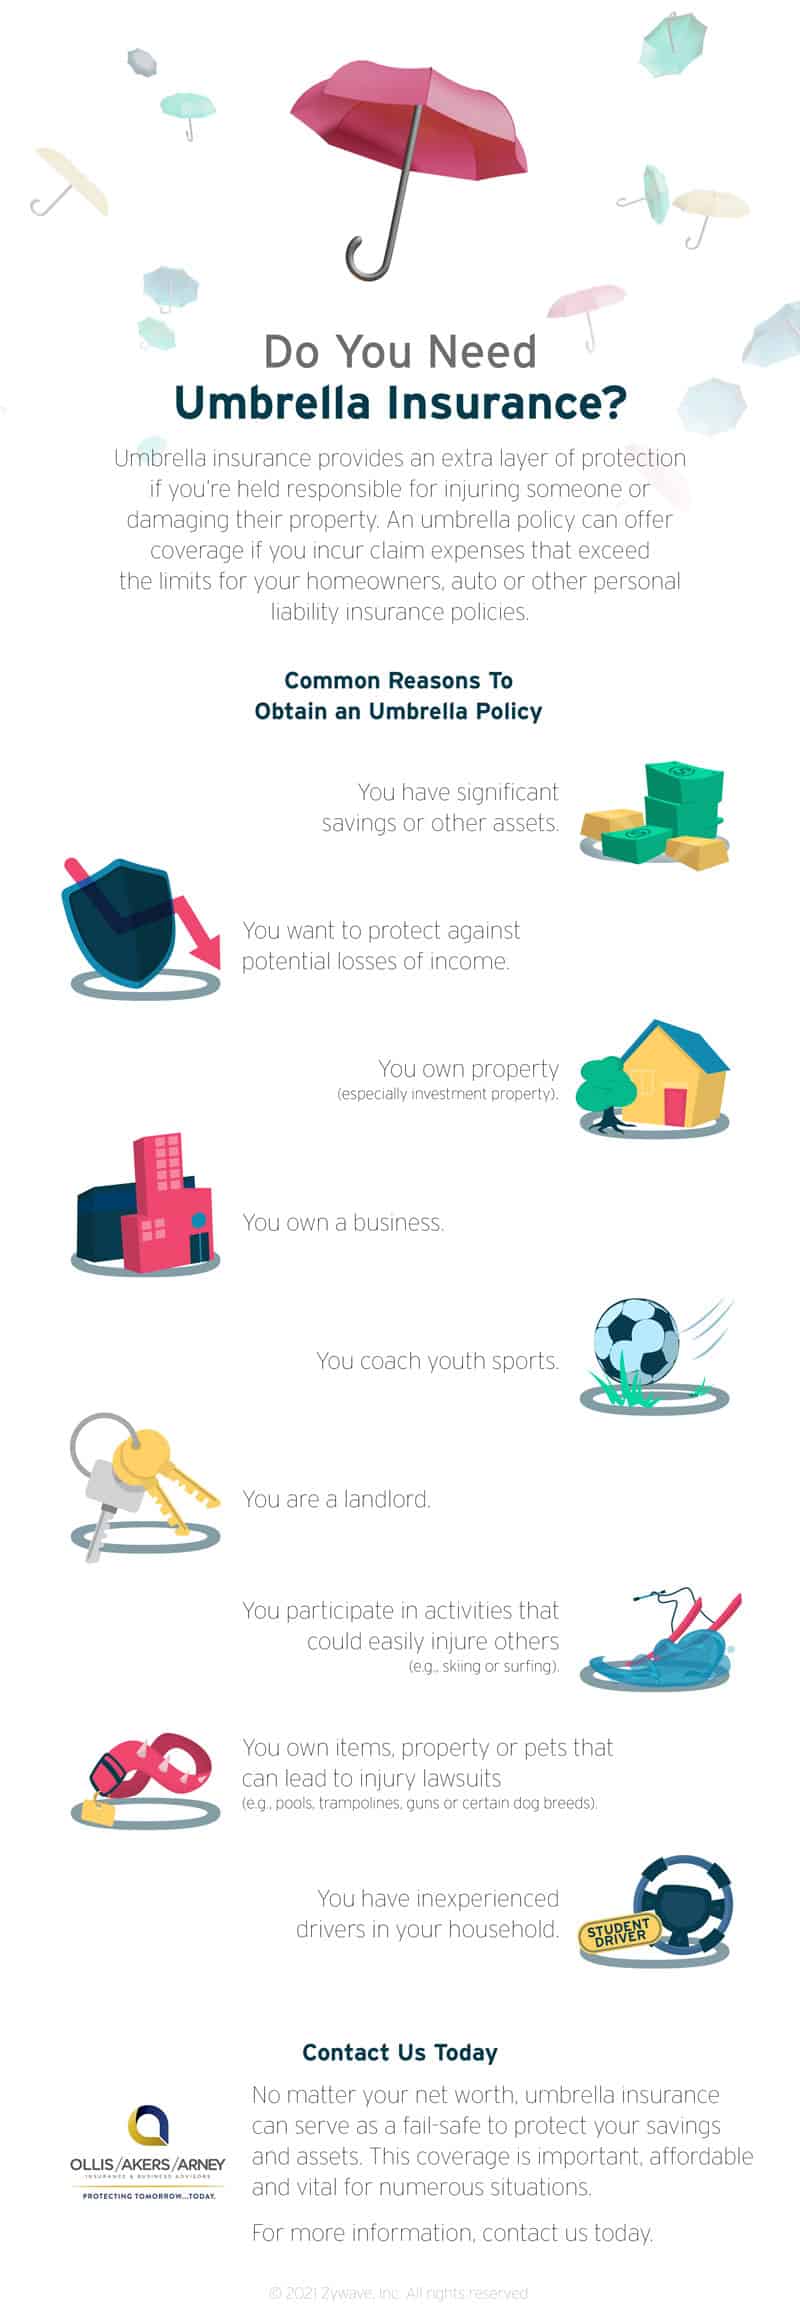 Do You Need an Umbrella Insurance Policy? – Infographic